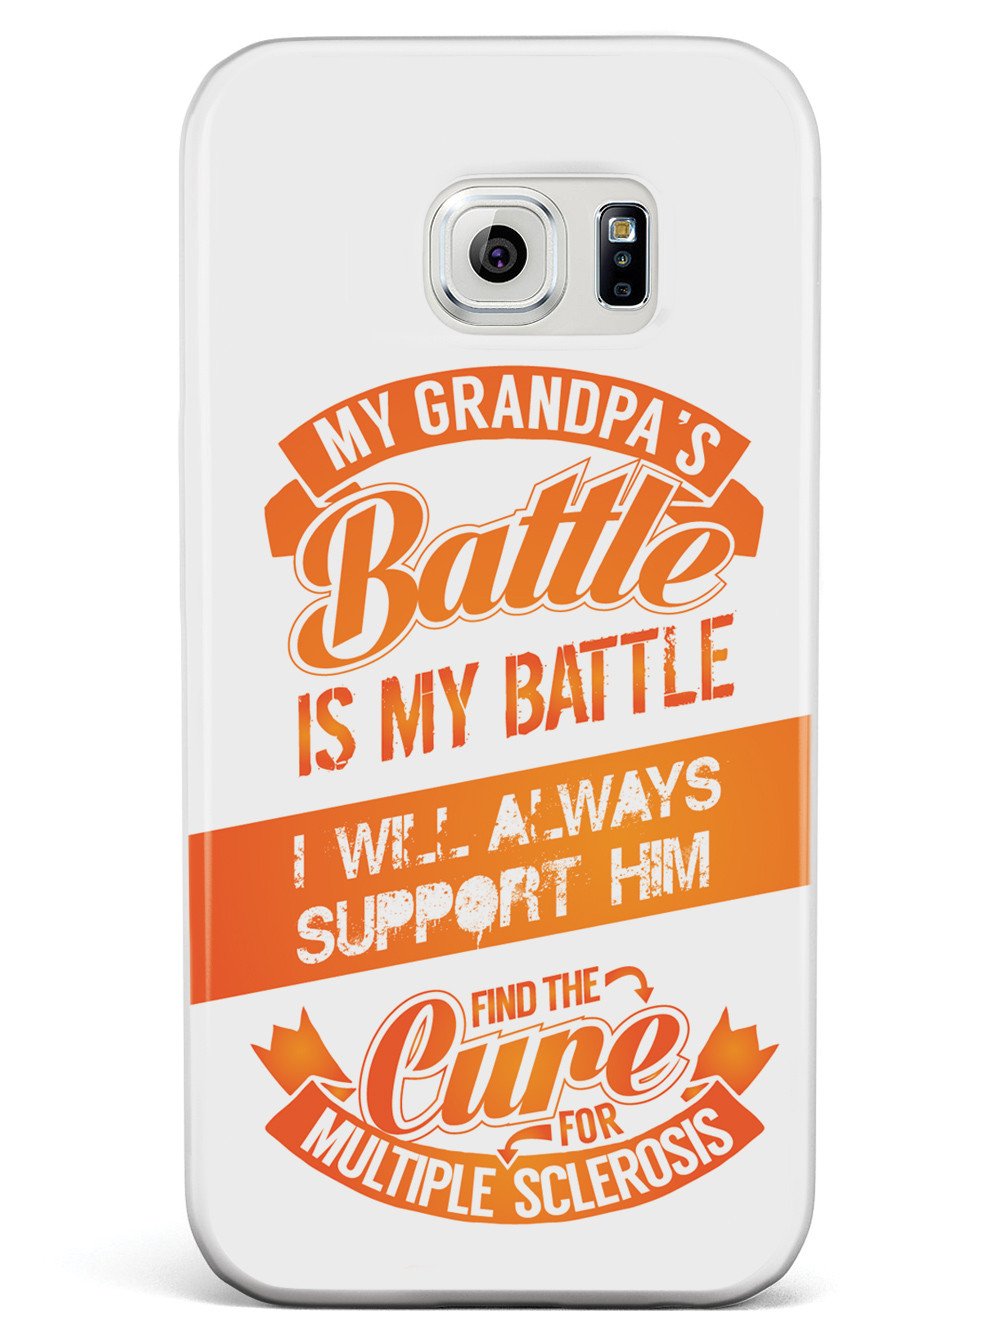 My Grandpa's Battle - Multiple Sclerosis Awareness/Support Case